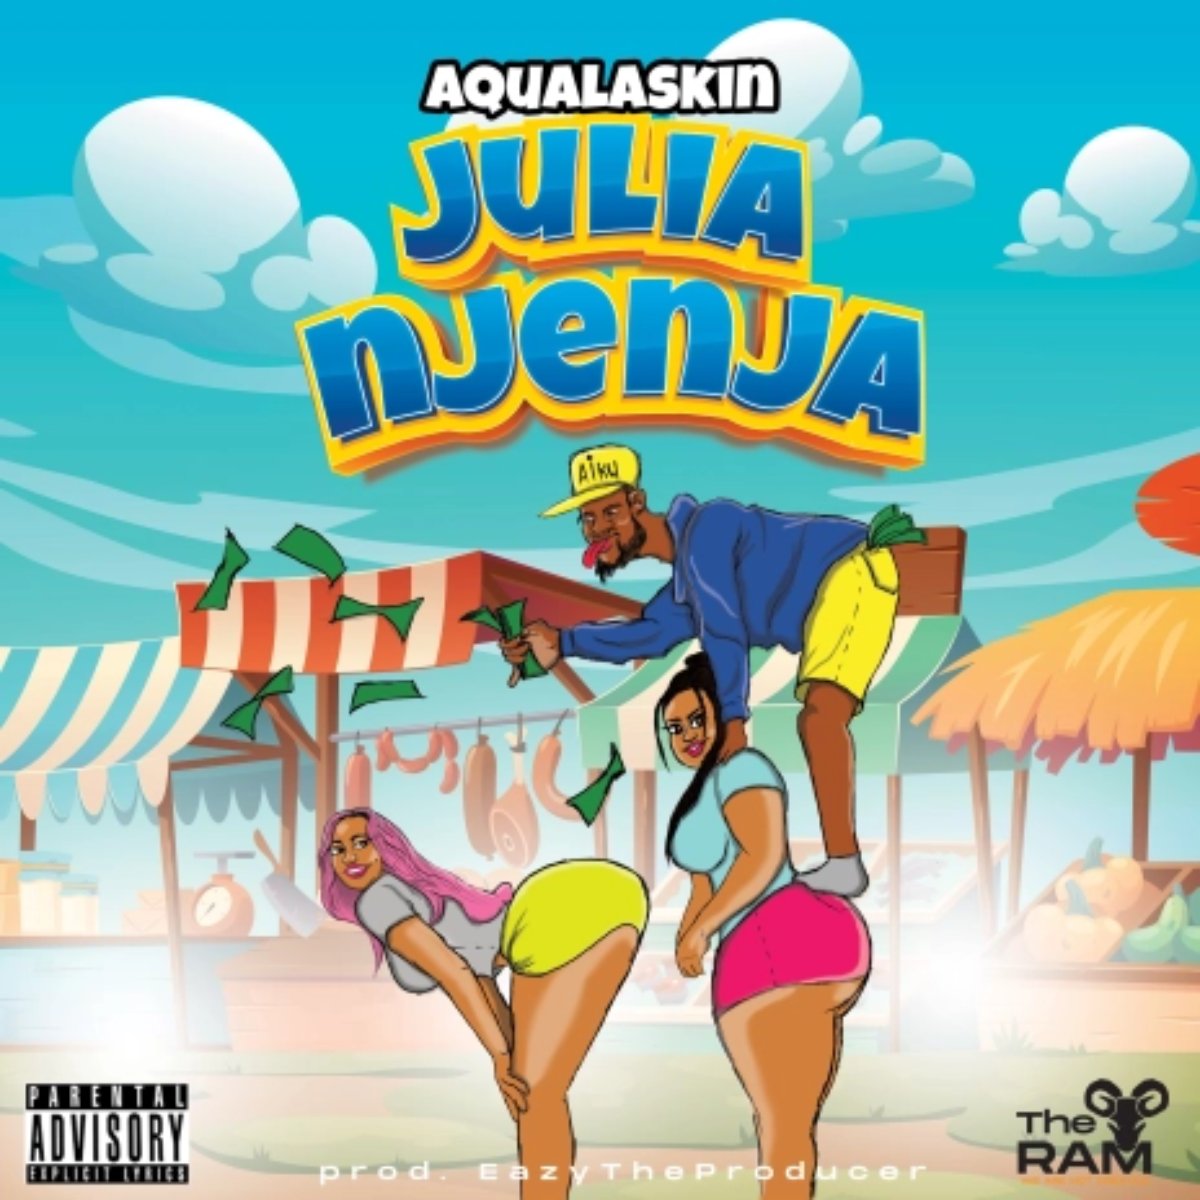 Julia Njenja is a feel good summer and club banger by Zambian Star, Aqualaskin. Prod by Eazy The Producer